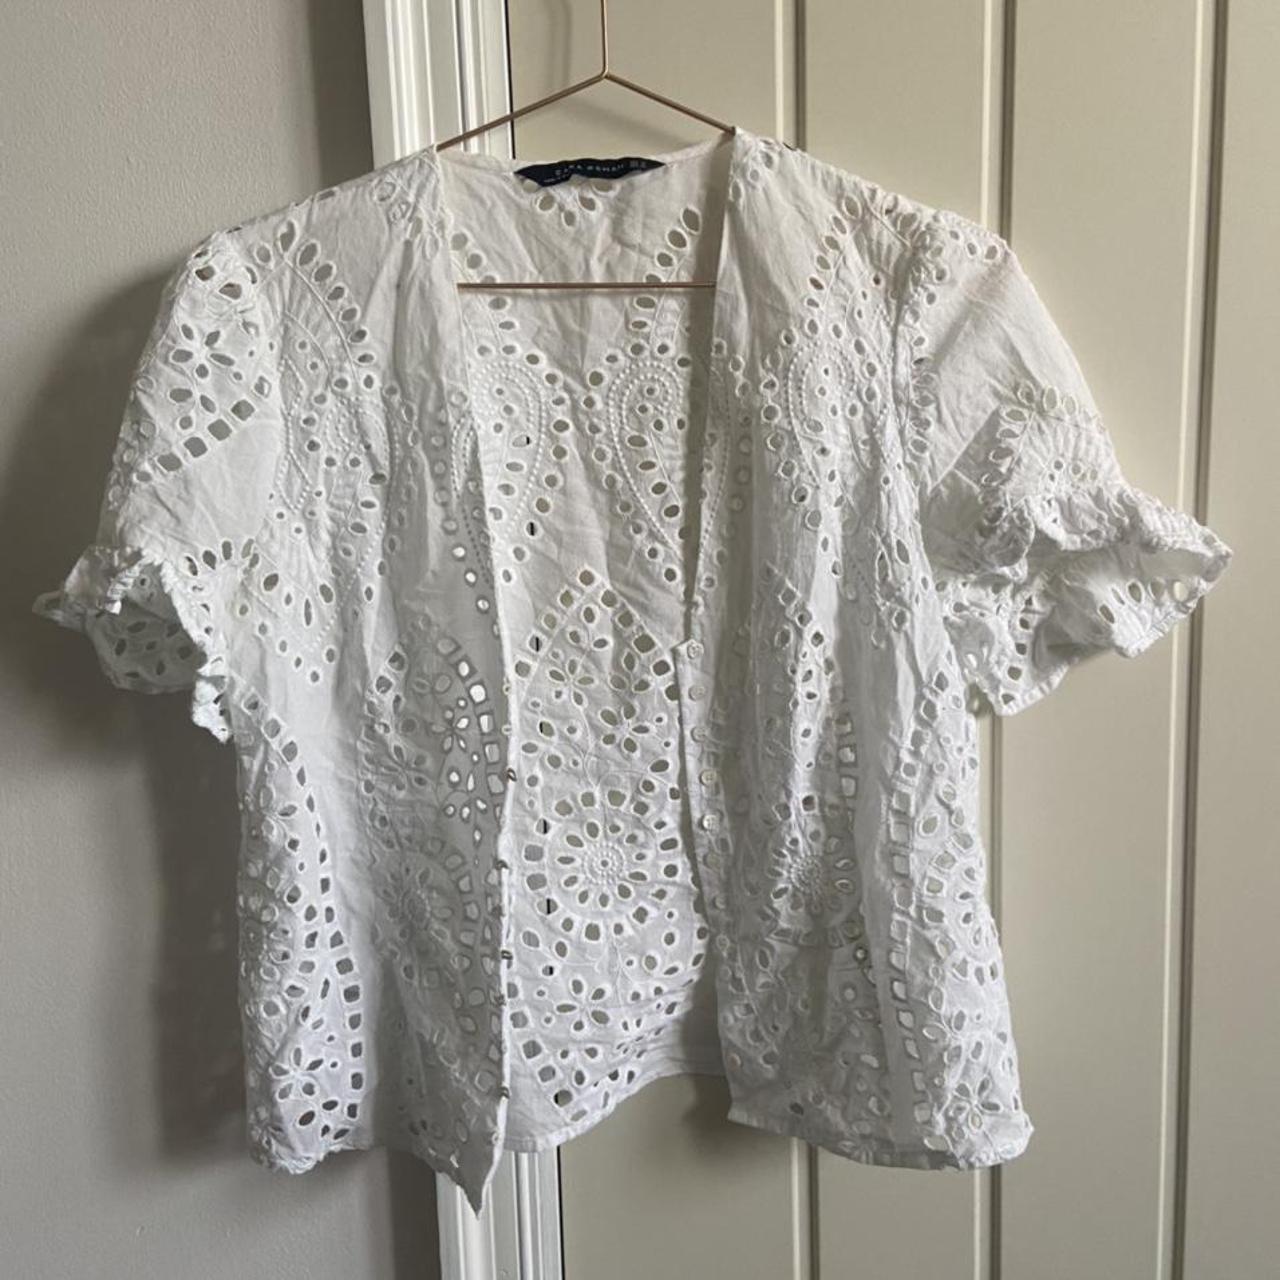 Zara white button up shirt with cut outs. - Depop